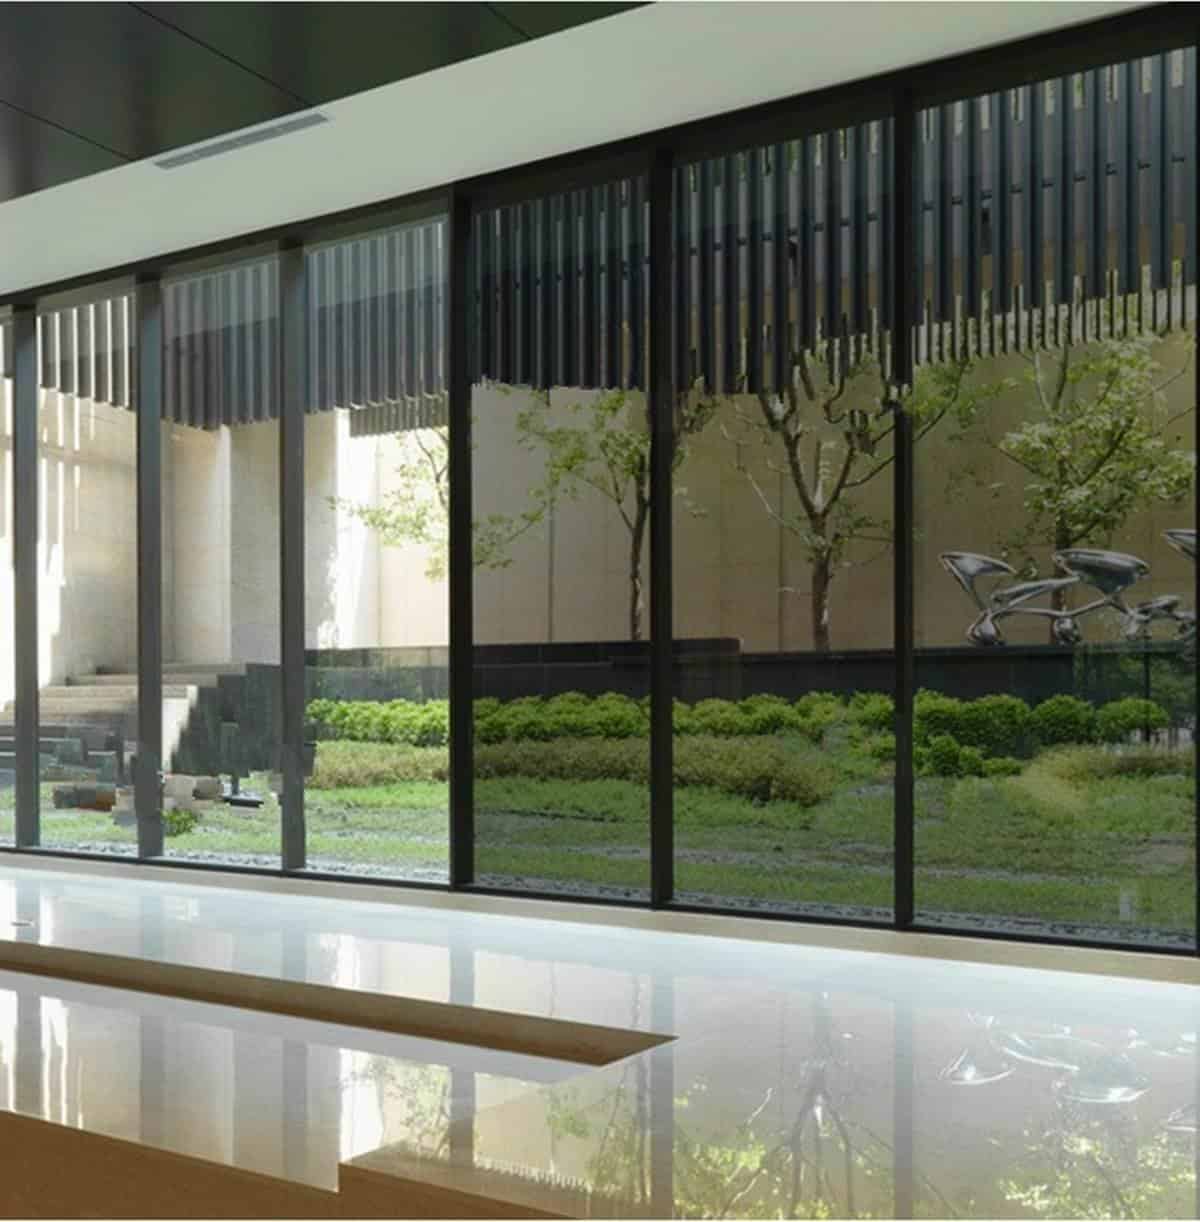 Sun Control Glass Film – Dark tint for cool indoors and privacy